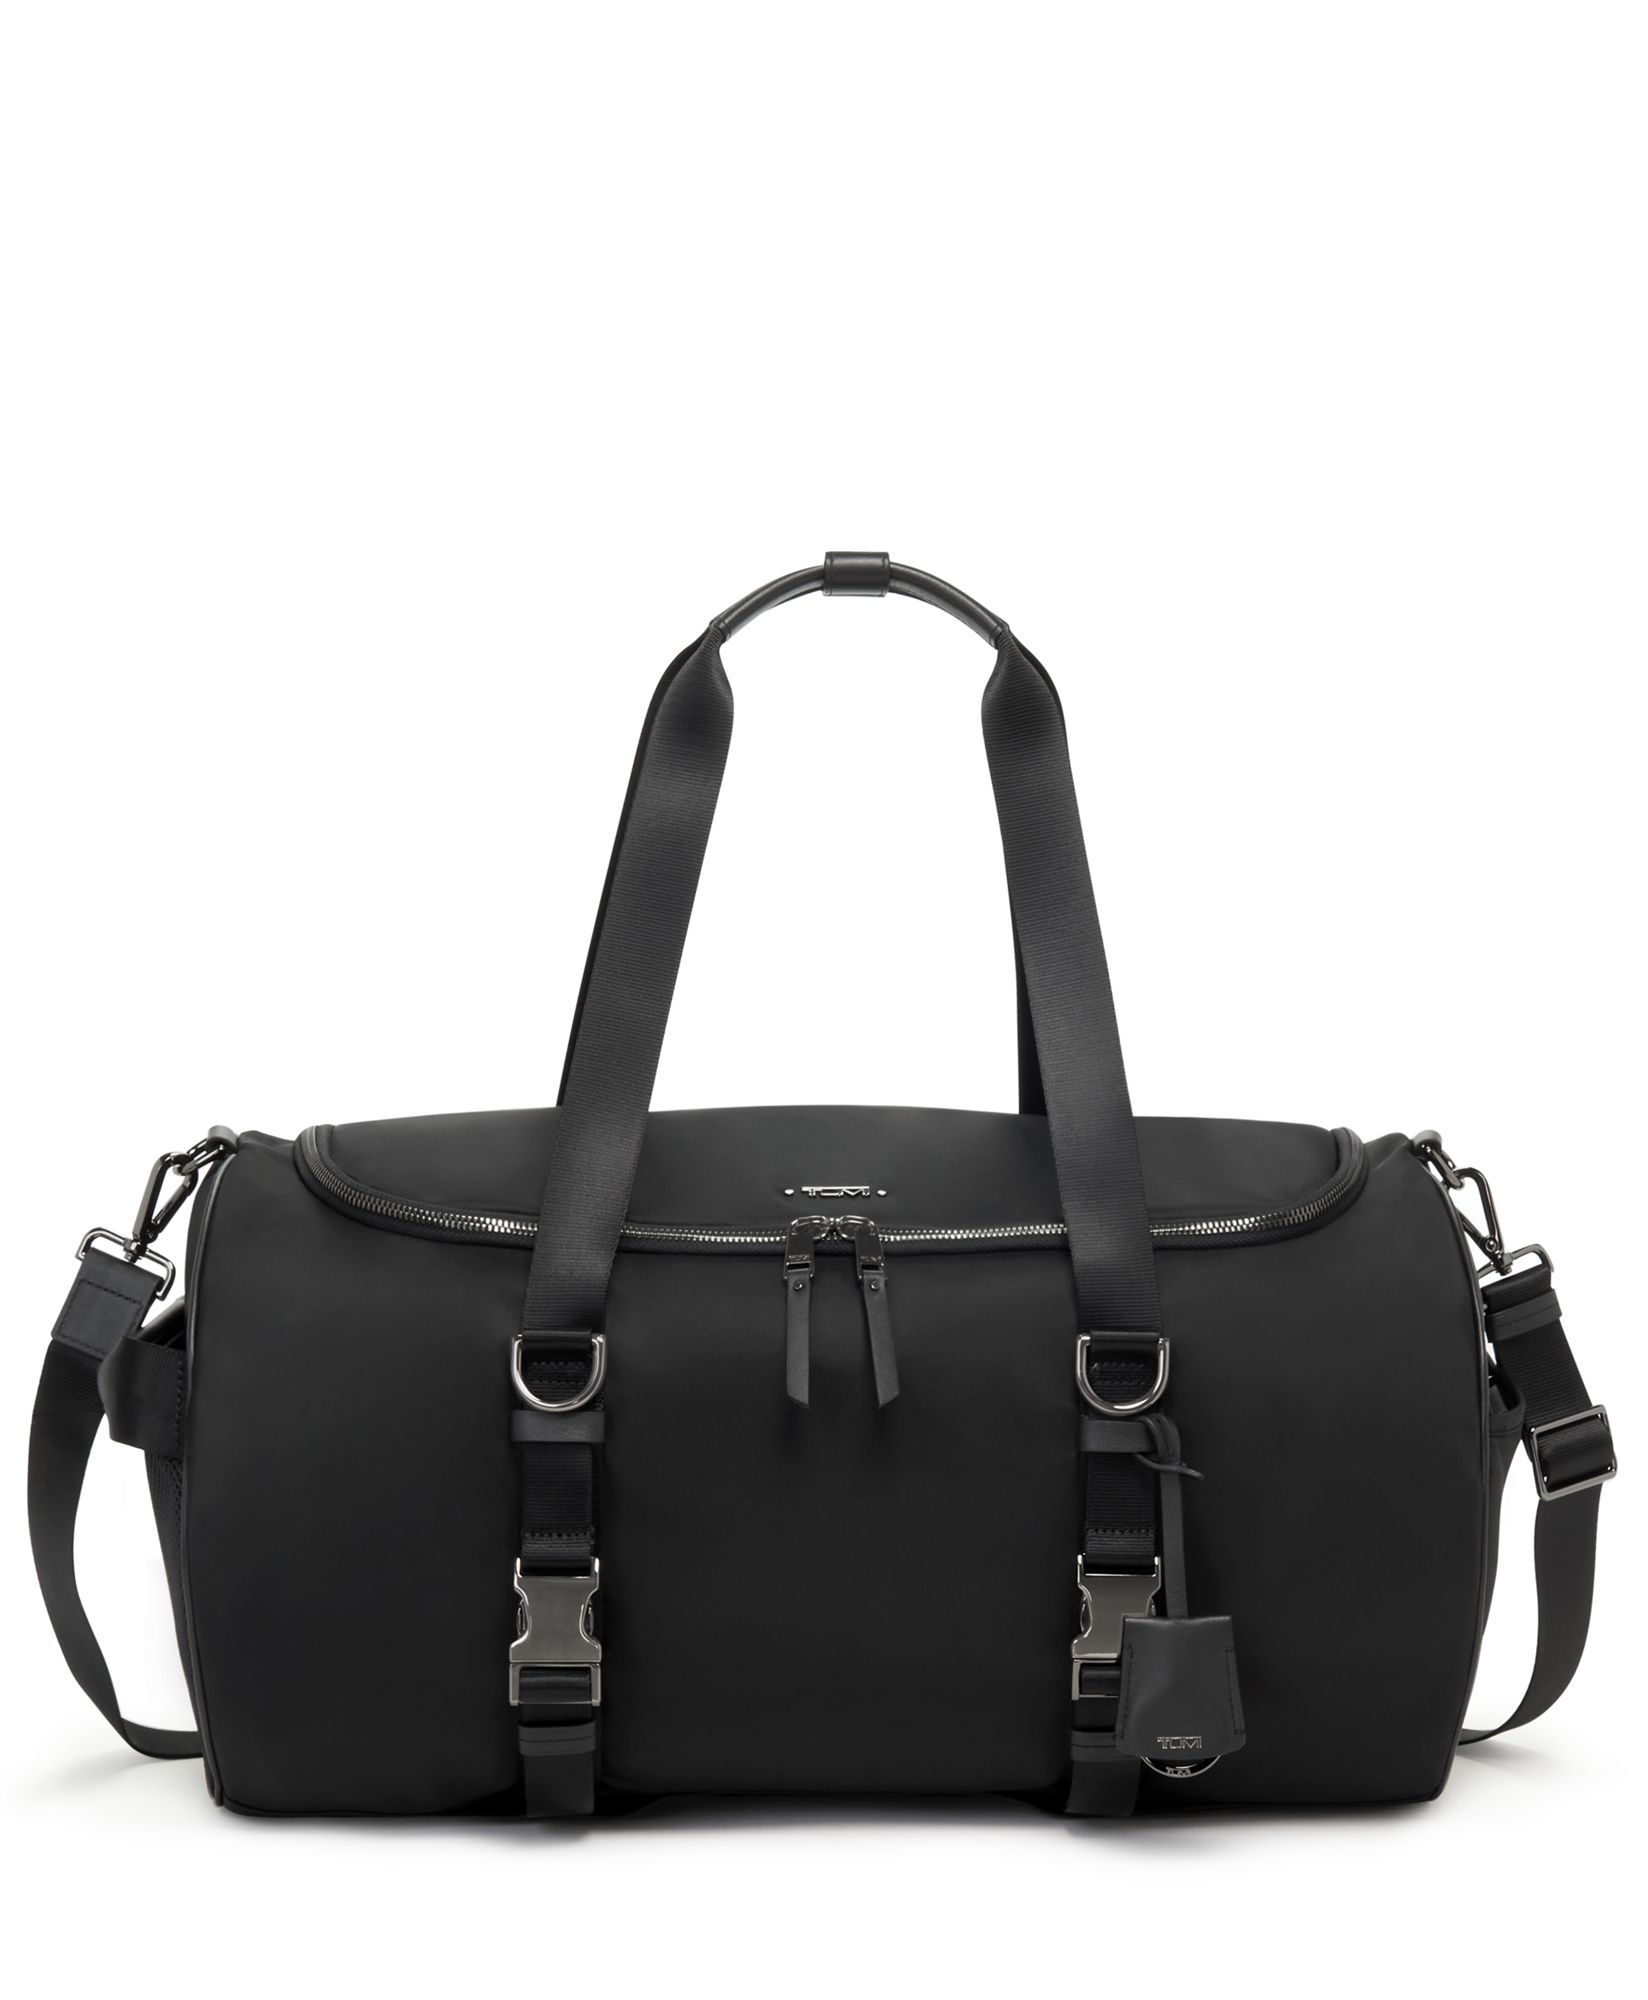 Carry-on Size Duffel Bag